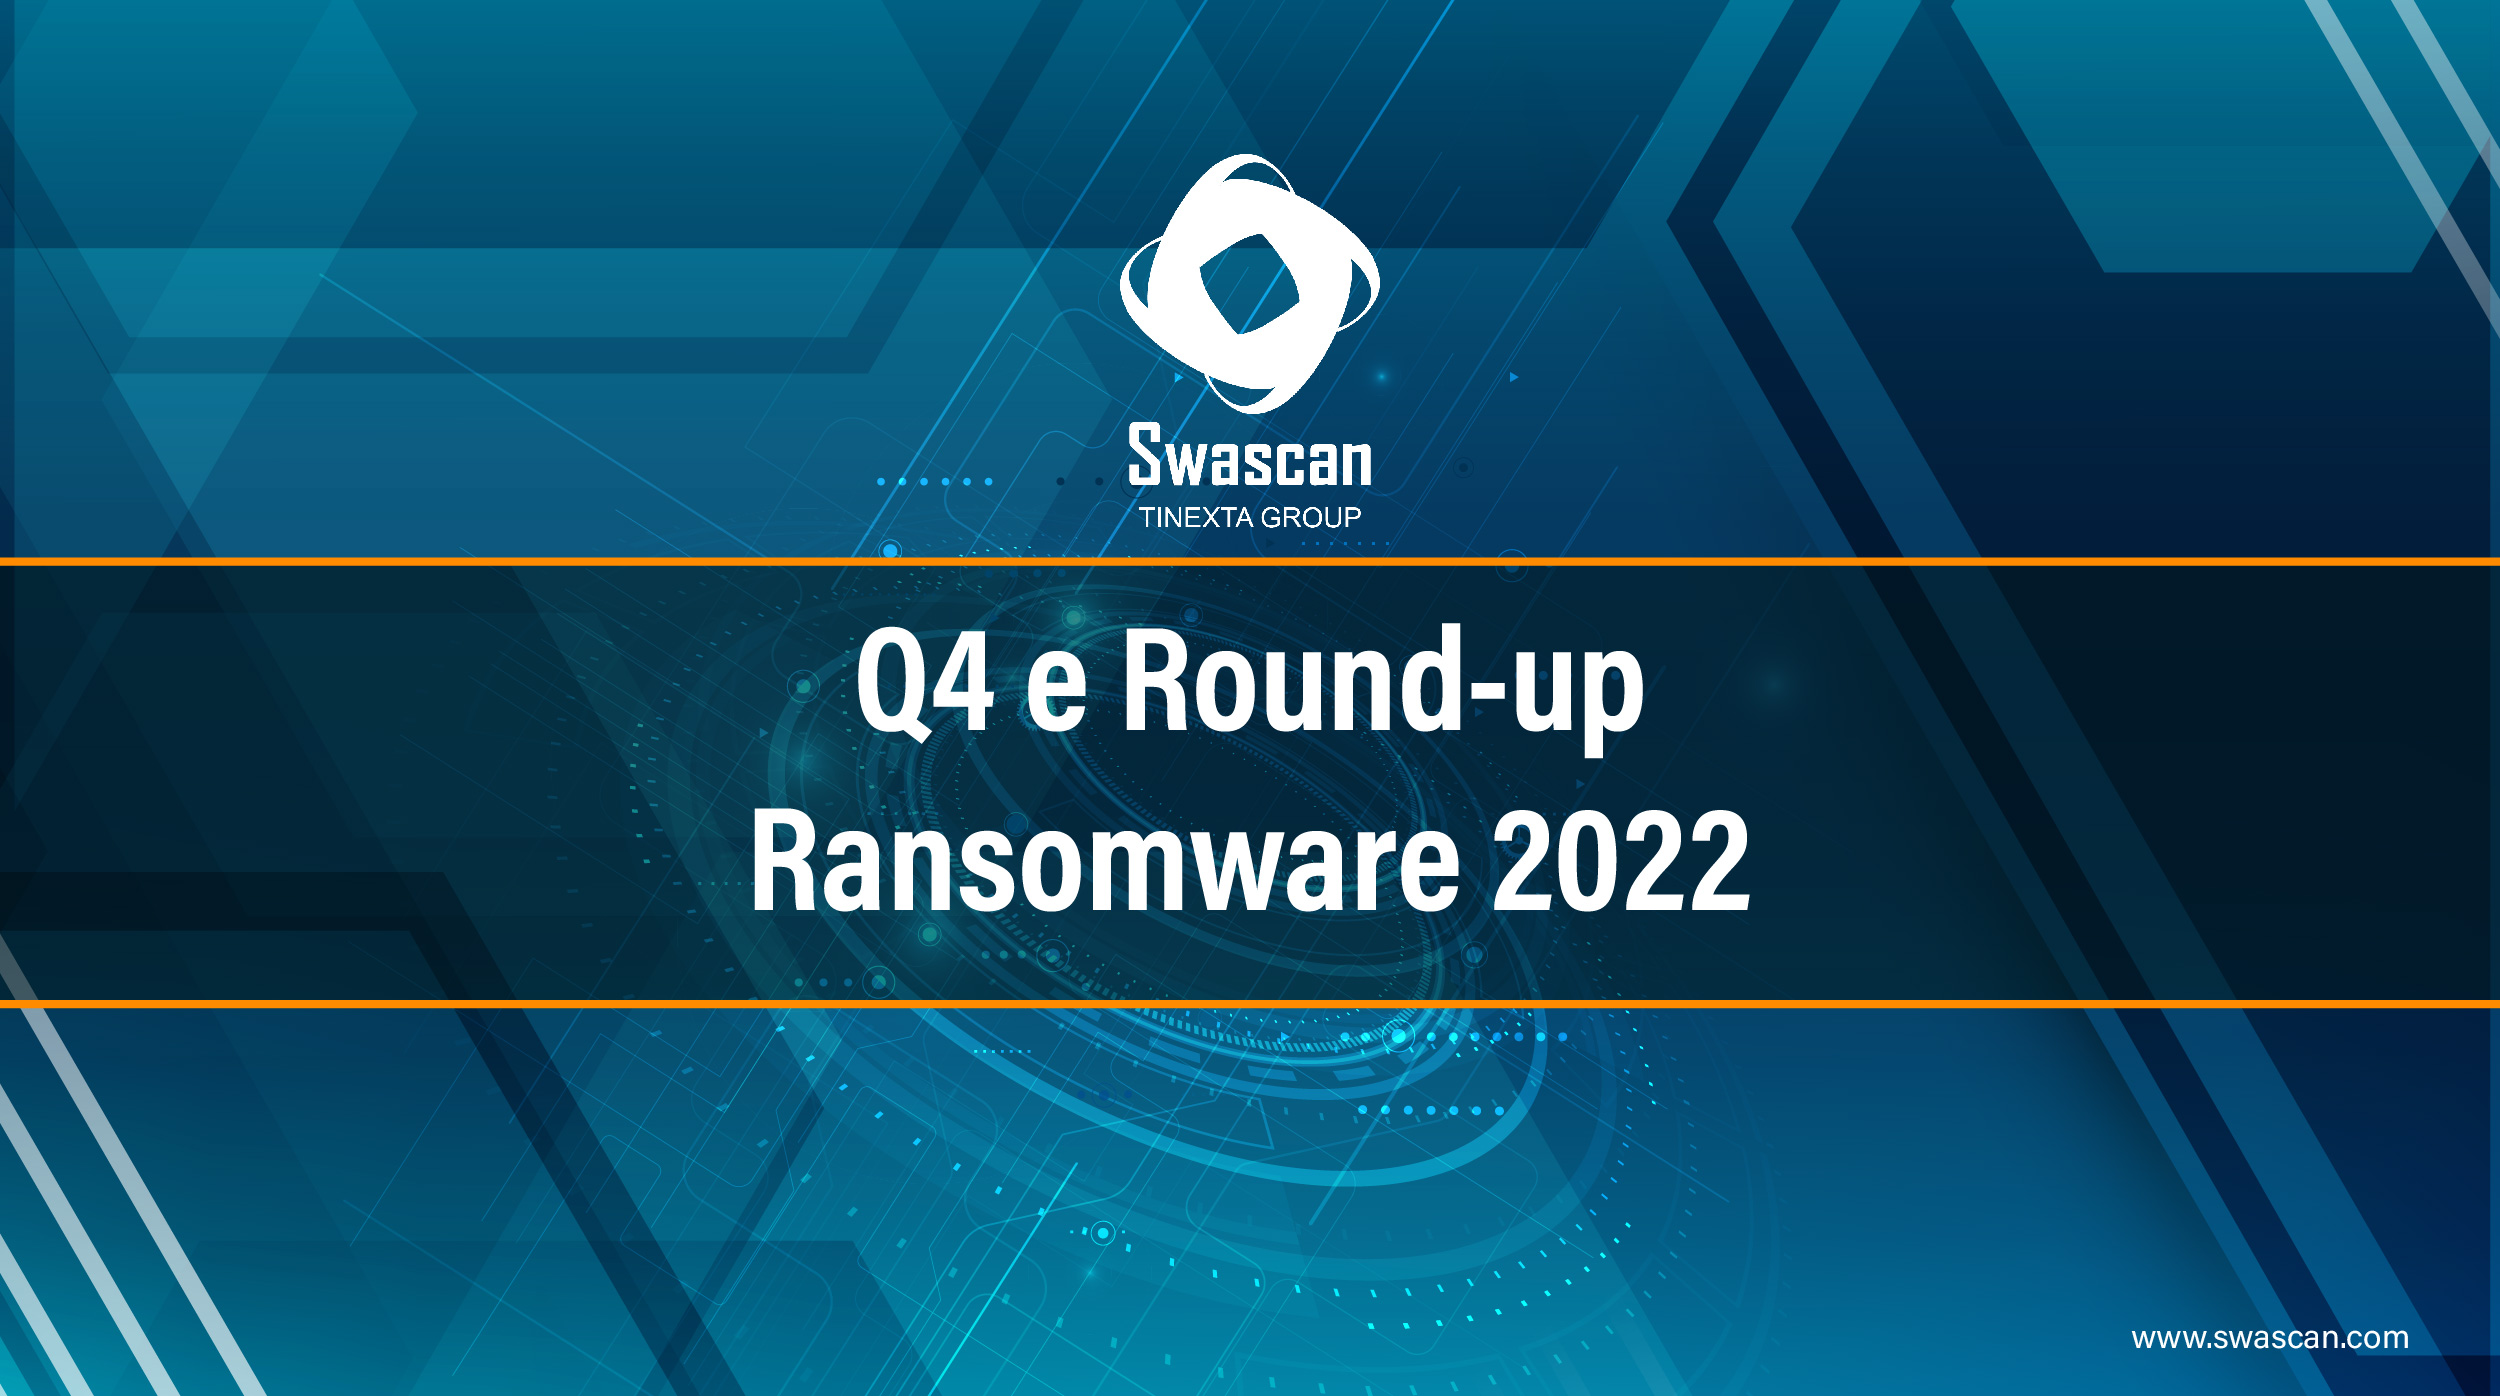 Report: Q4 e Round-up Ransomware 2022